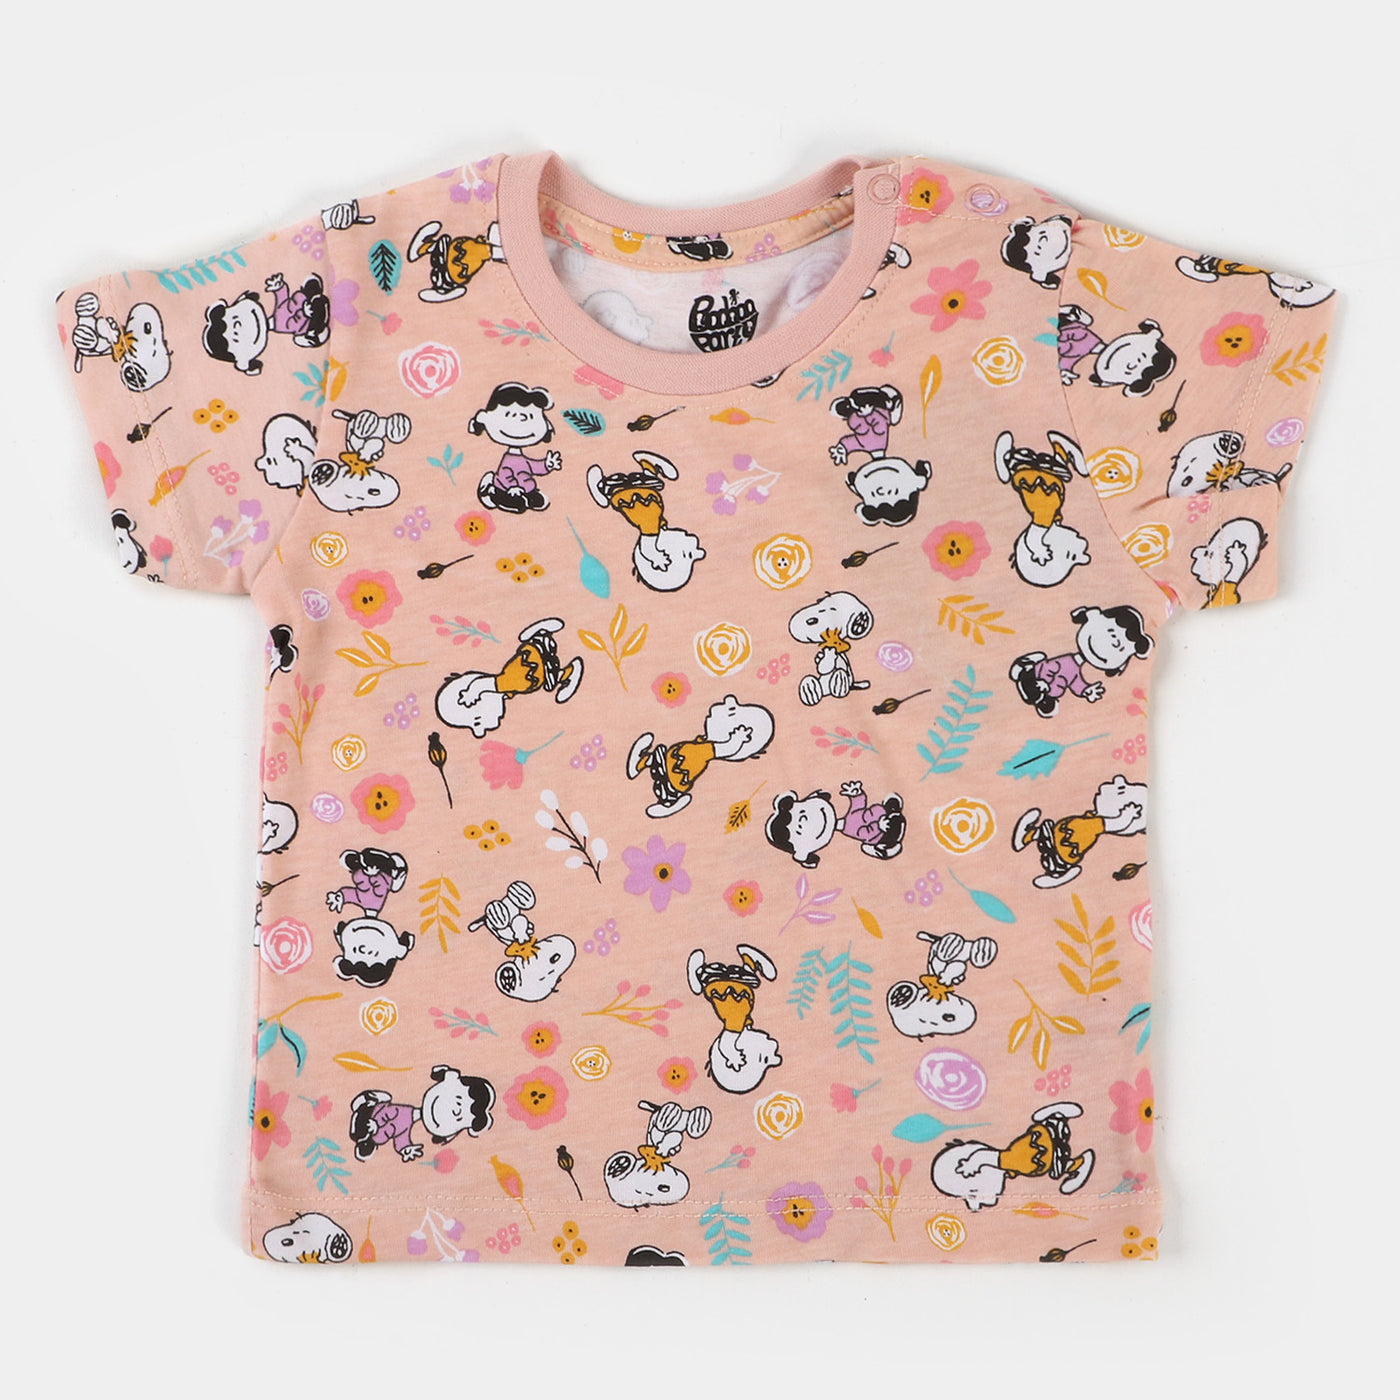 Infant Girls T-Shirt Character Printed - Scallop